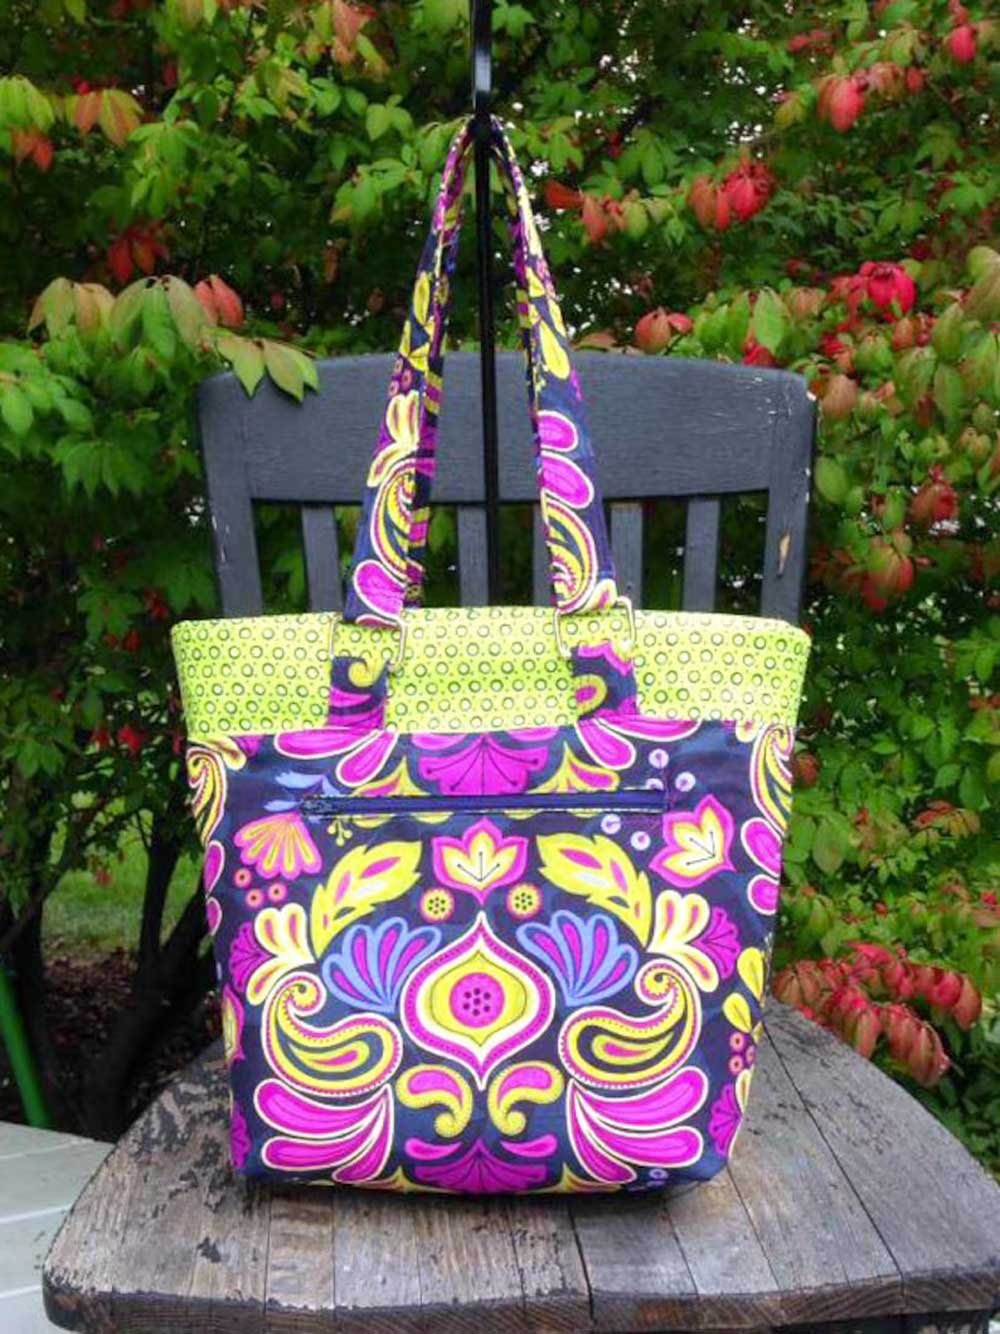 This stylish bag is perfect to make using your favorite coordinating fabrics.